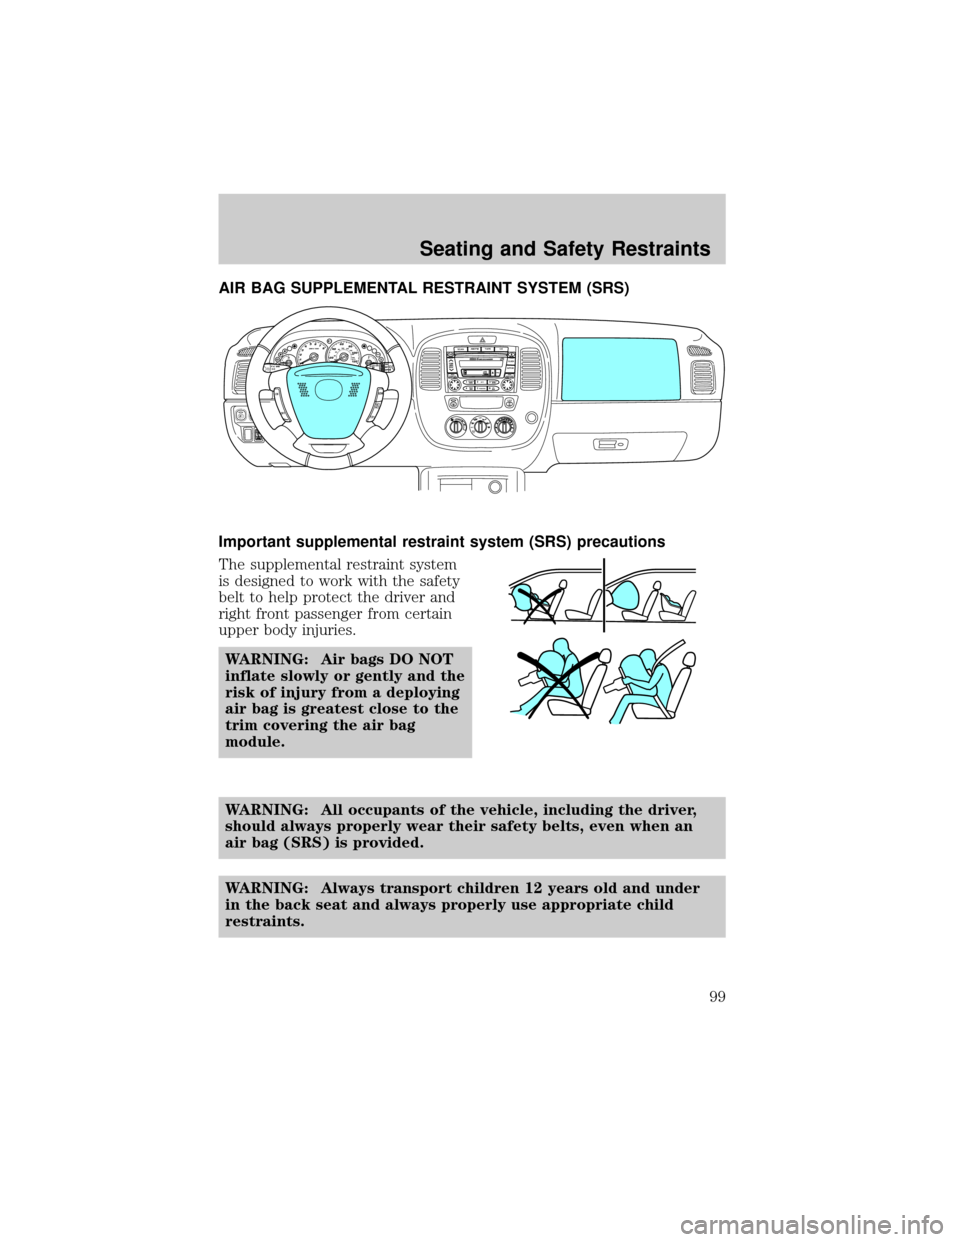 MAZDA MODEL TRIBUTE 2003  Owners Manual (in English) AIR BAG SUPPLEMENTAL RESTRAINT SYSTEM (SRS)
Important supplemental restraint system (SRS) precautions
The supplemental restraint system
is designed to work with the safety
belt to help protect the dri